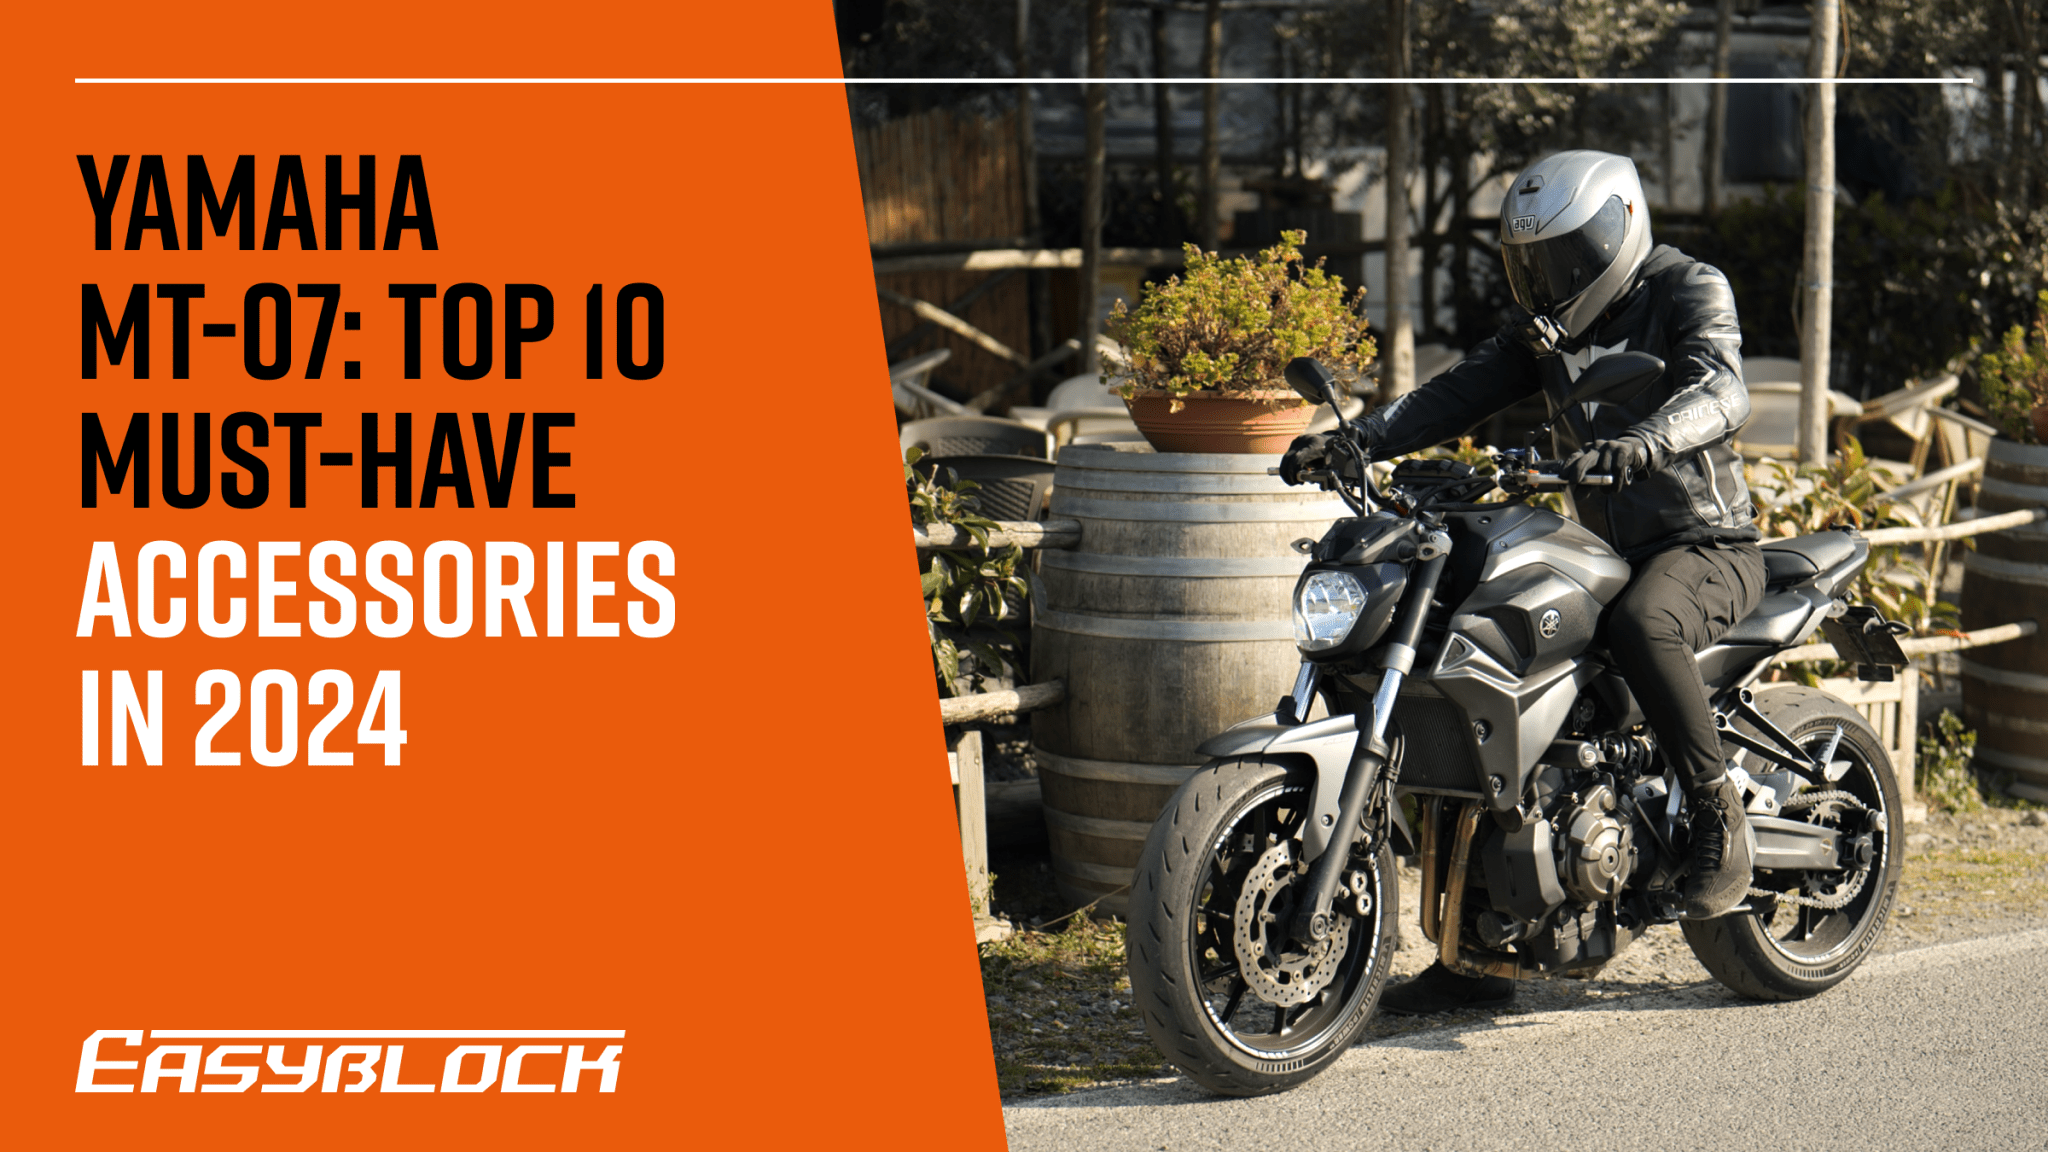 Yamaha MT-07: Top 10 Must-Have Accessories in 2024